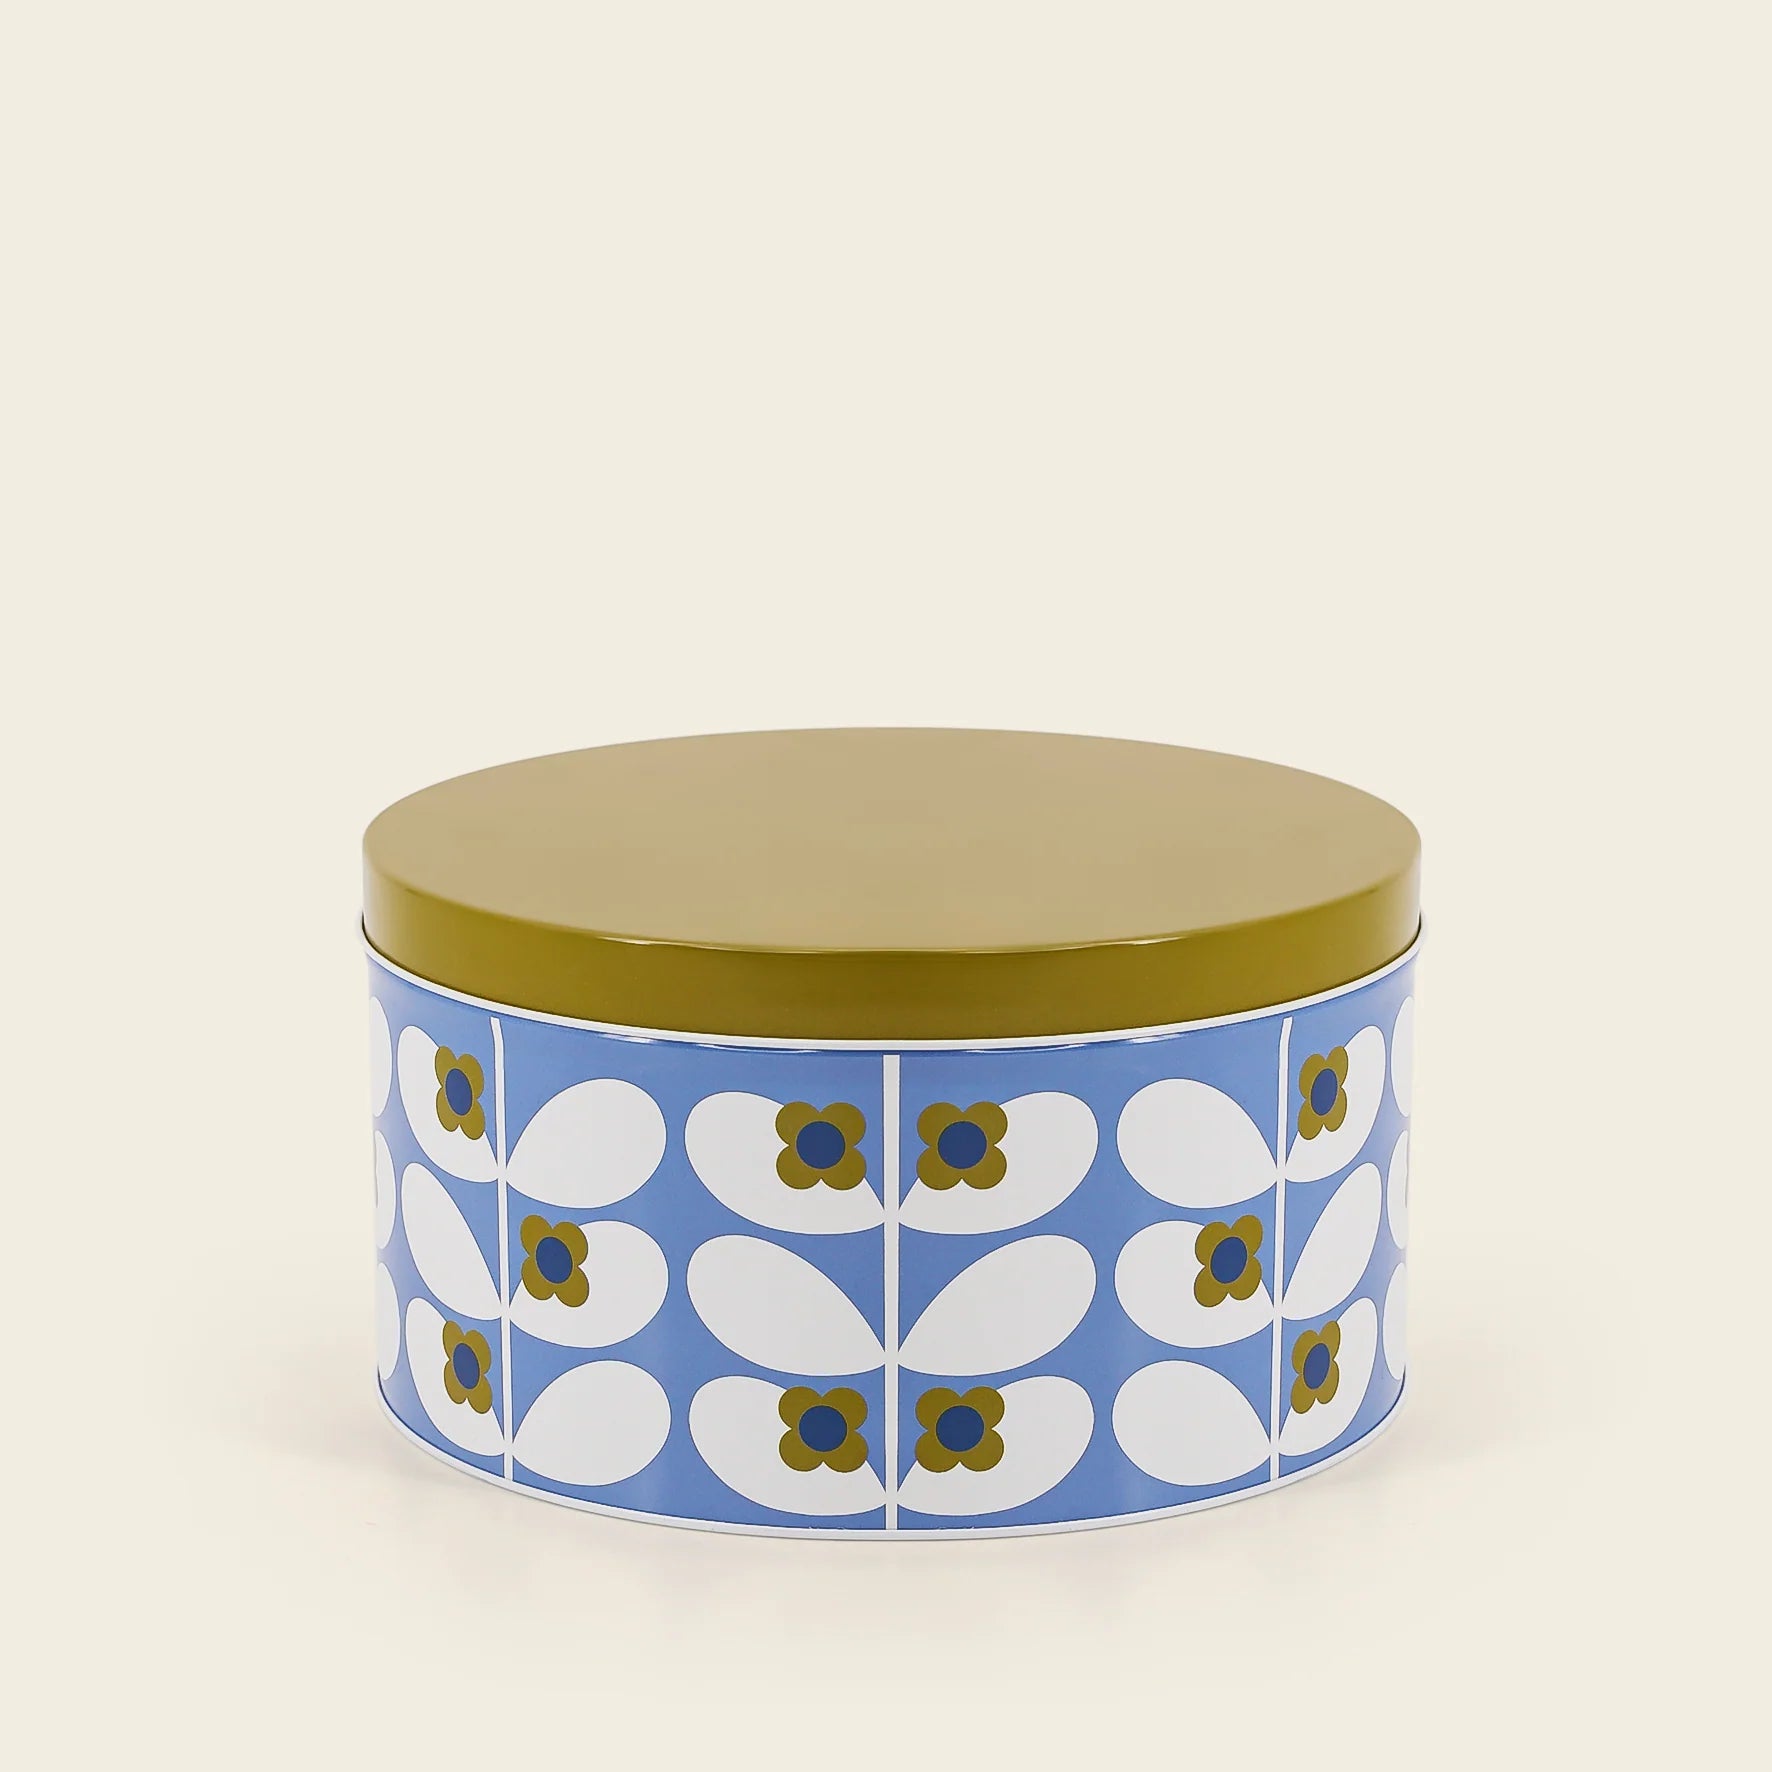 Fab Gifts | Orla Kiely Sunflower Sky Nesting Cake Tins Set Of 3 by Weirs of Baggot Street